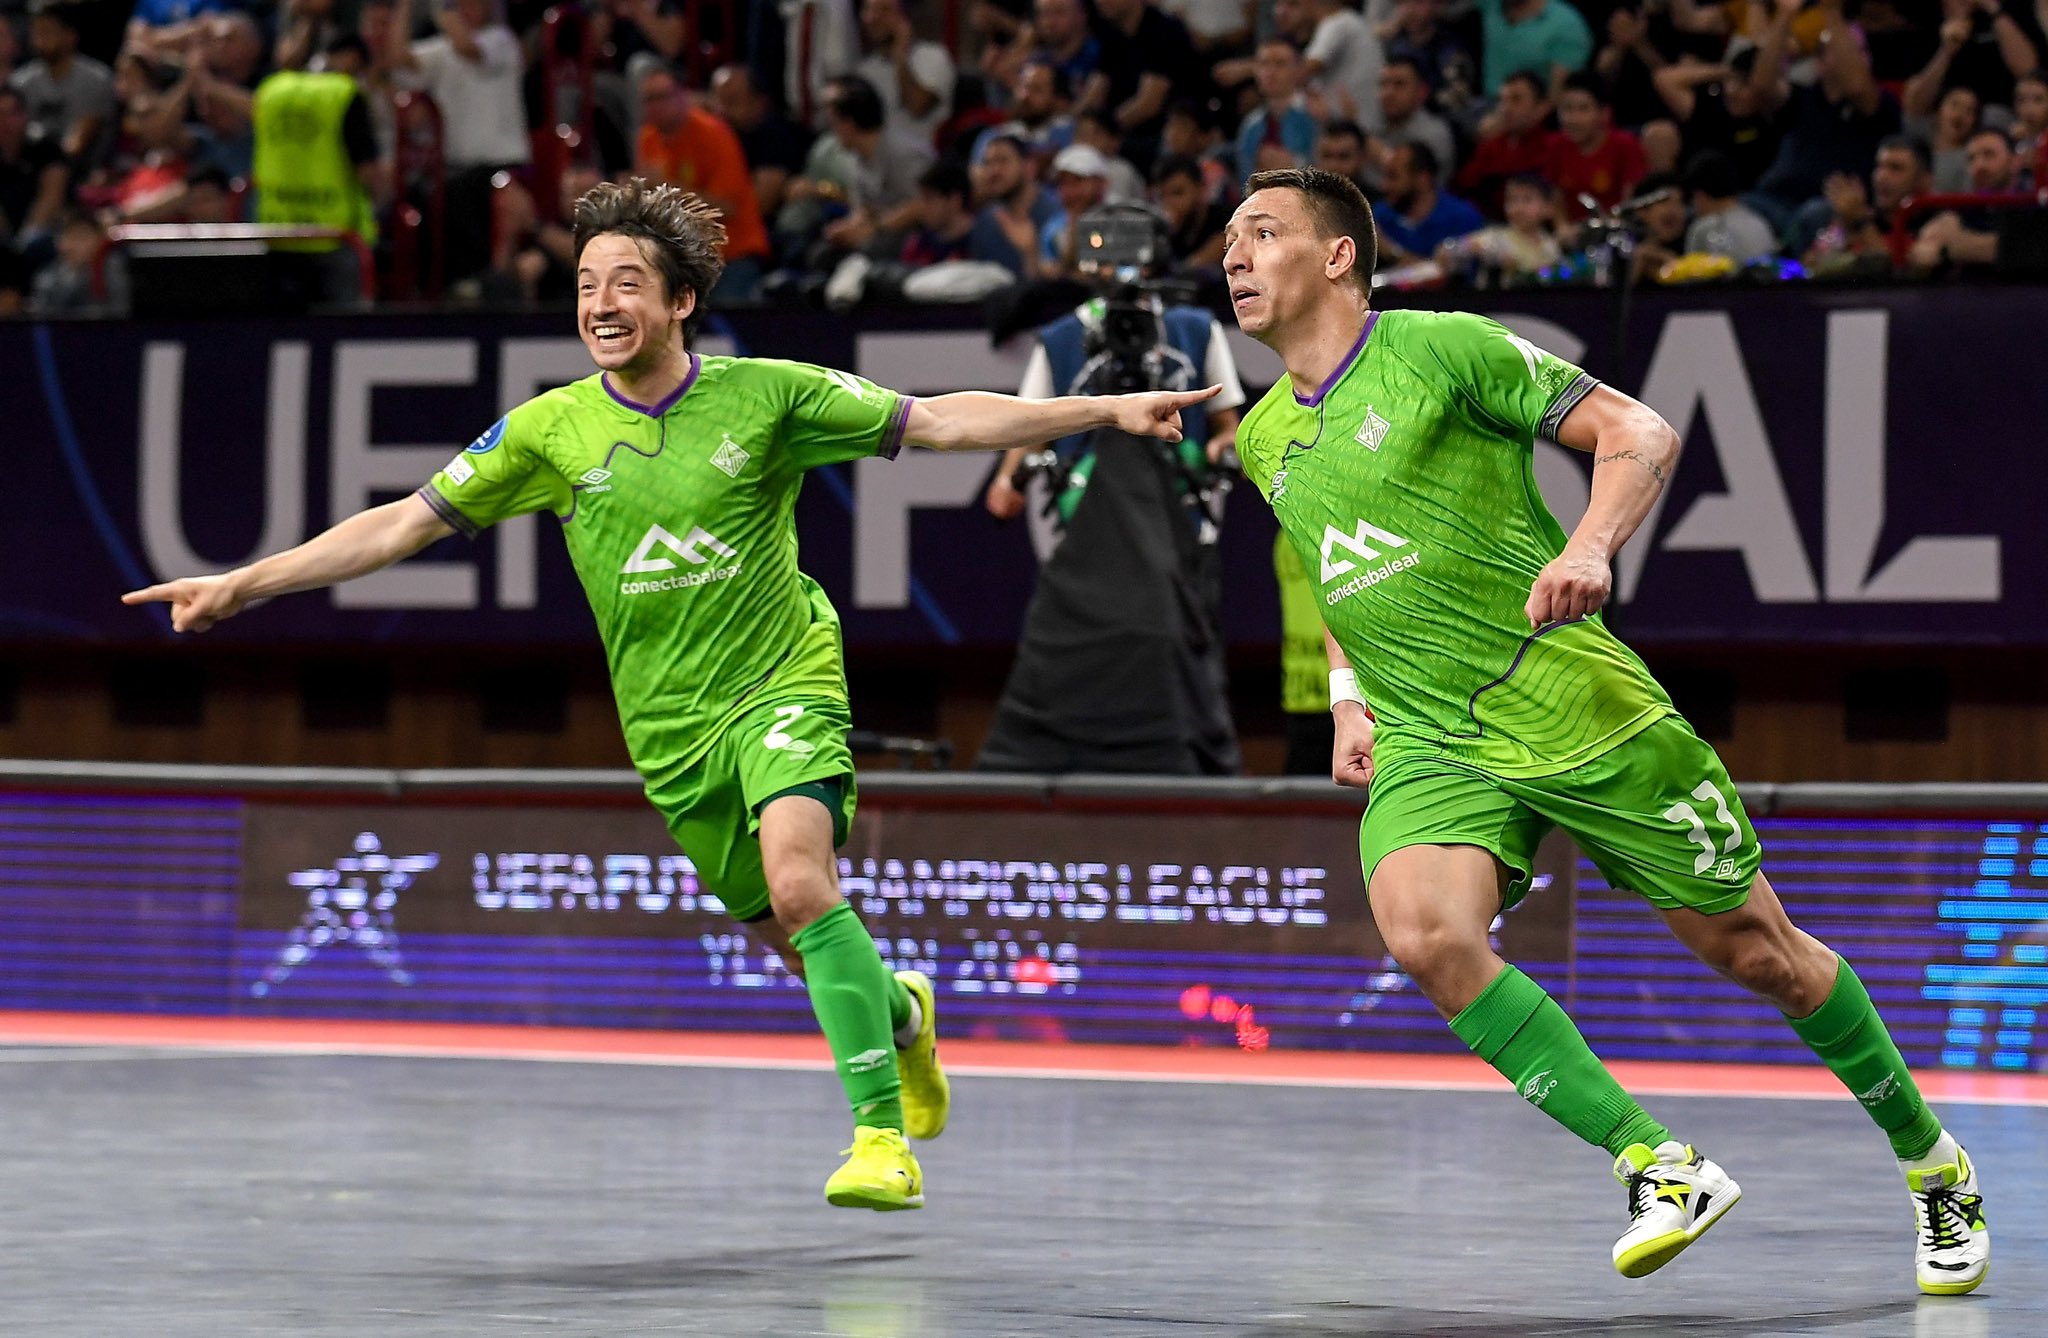 Palma Clinches Second Consecutive UEFA Futsal Champions League Title in Thrilling Final